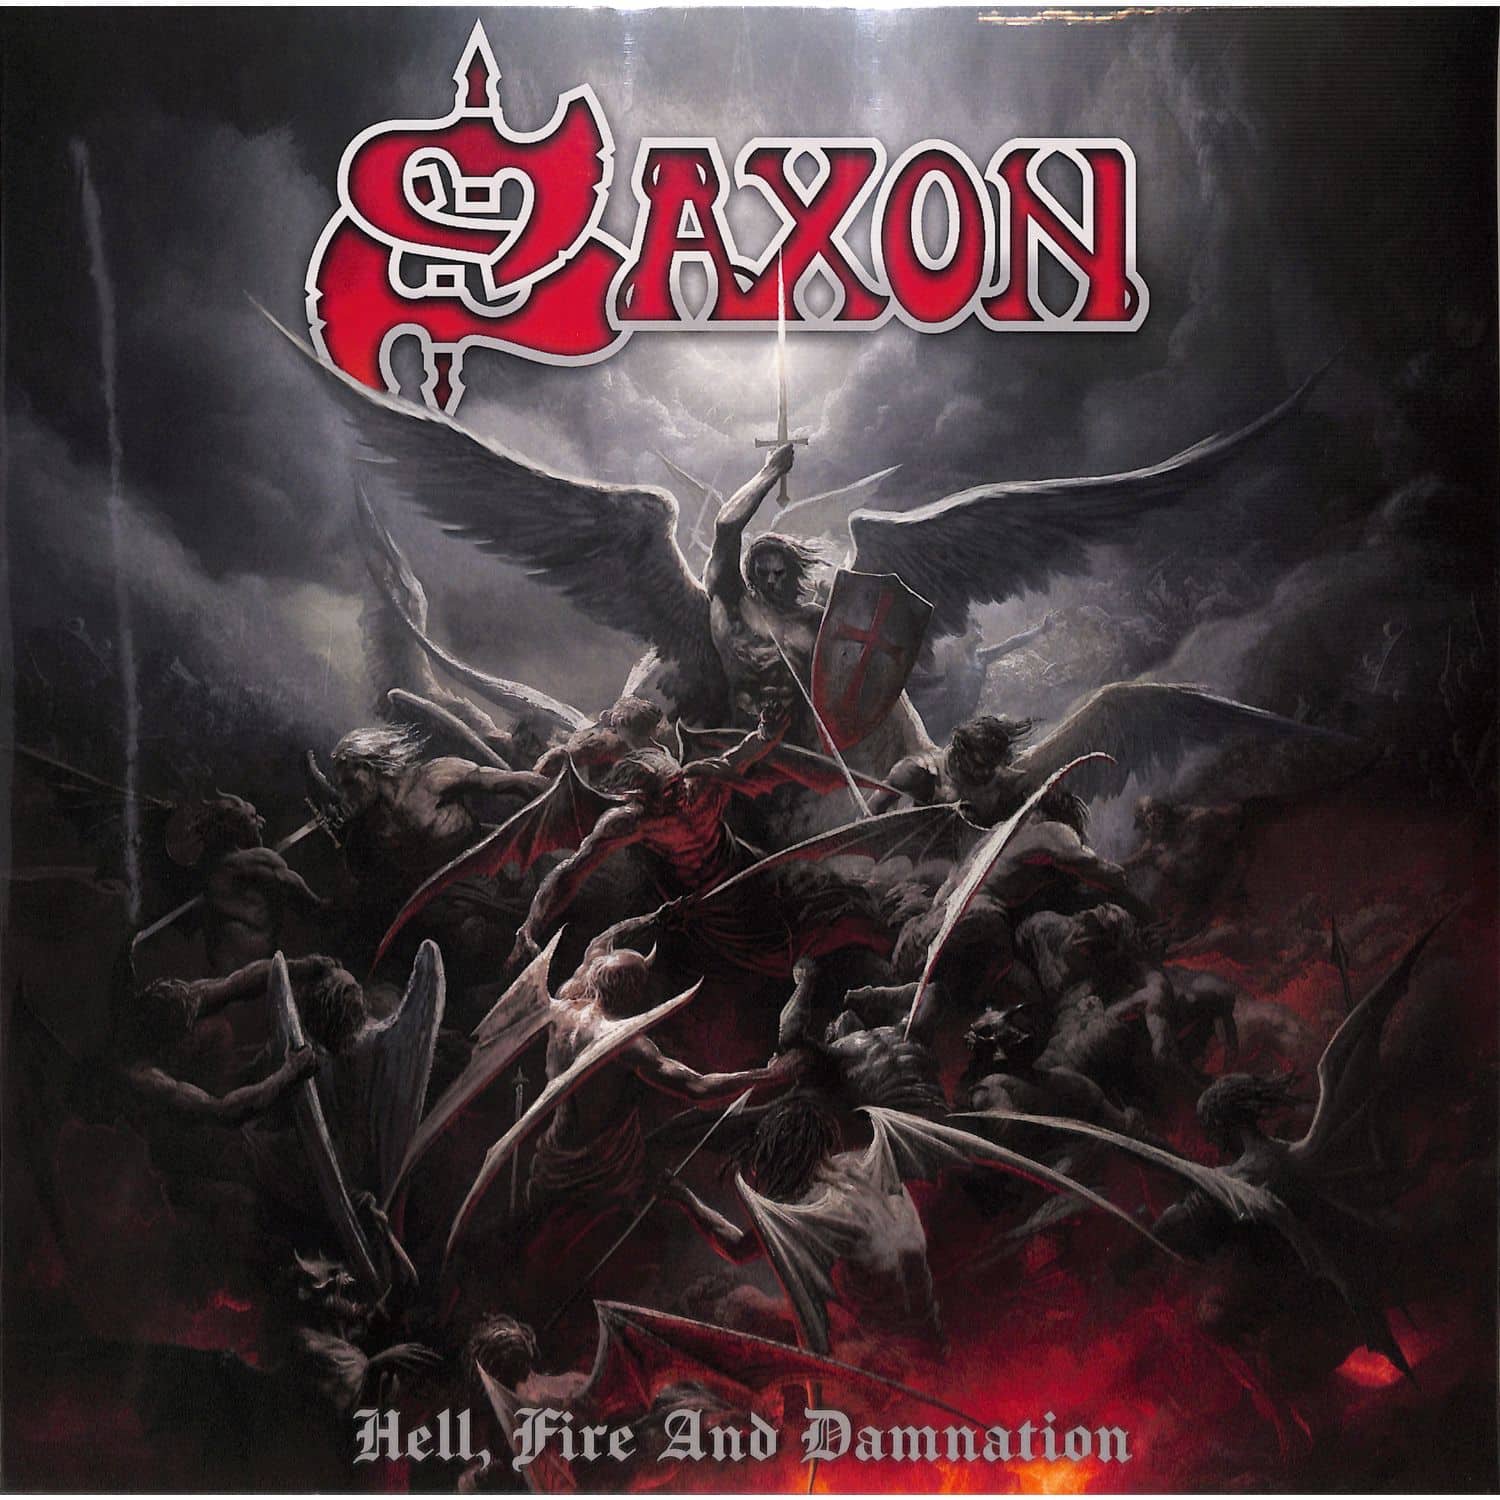 Saxon - HELL, FIRE AND DAMNATION 